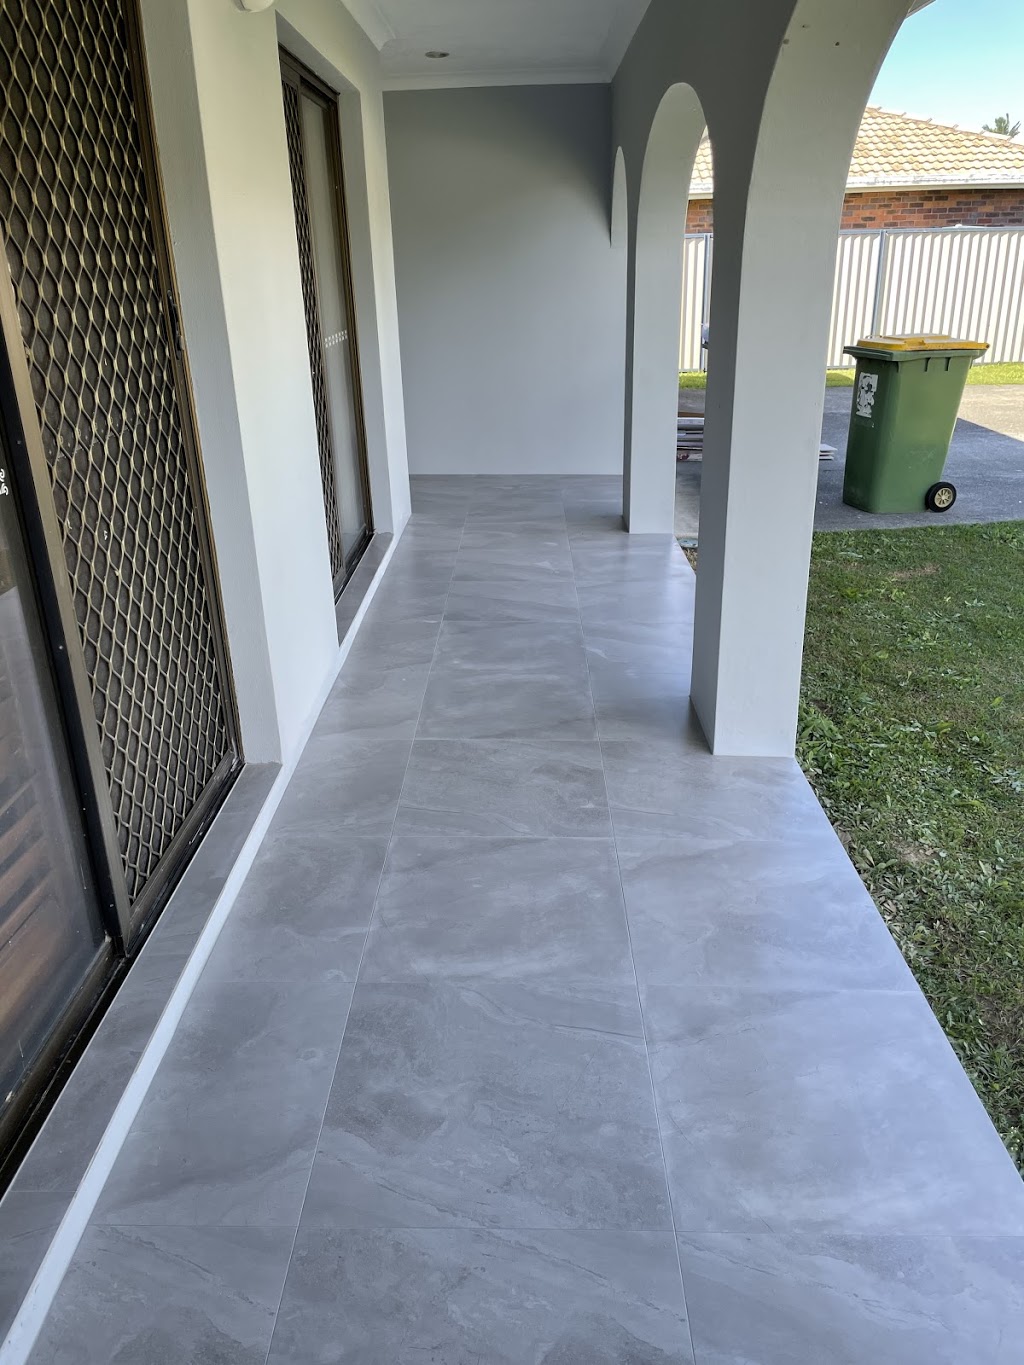 Nowak Tile Works | general contractor | 40 Marble Arch Pl, Arundel QLD 4214, Australia | 0432520097 OR +61 432 520 097